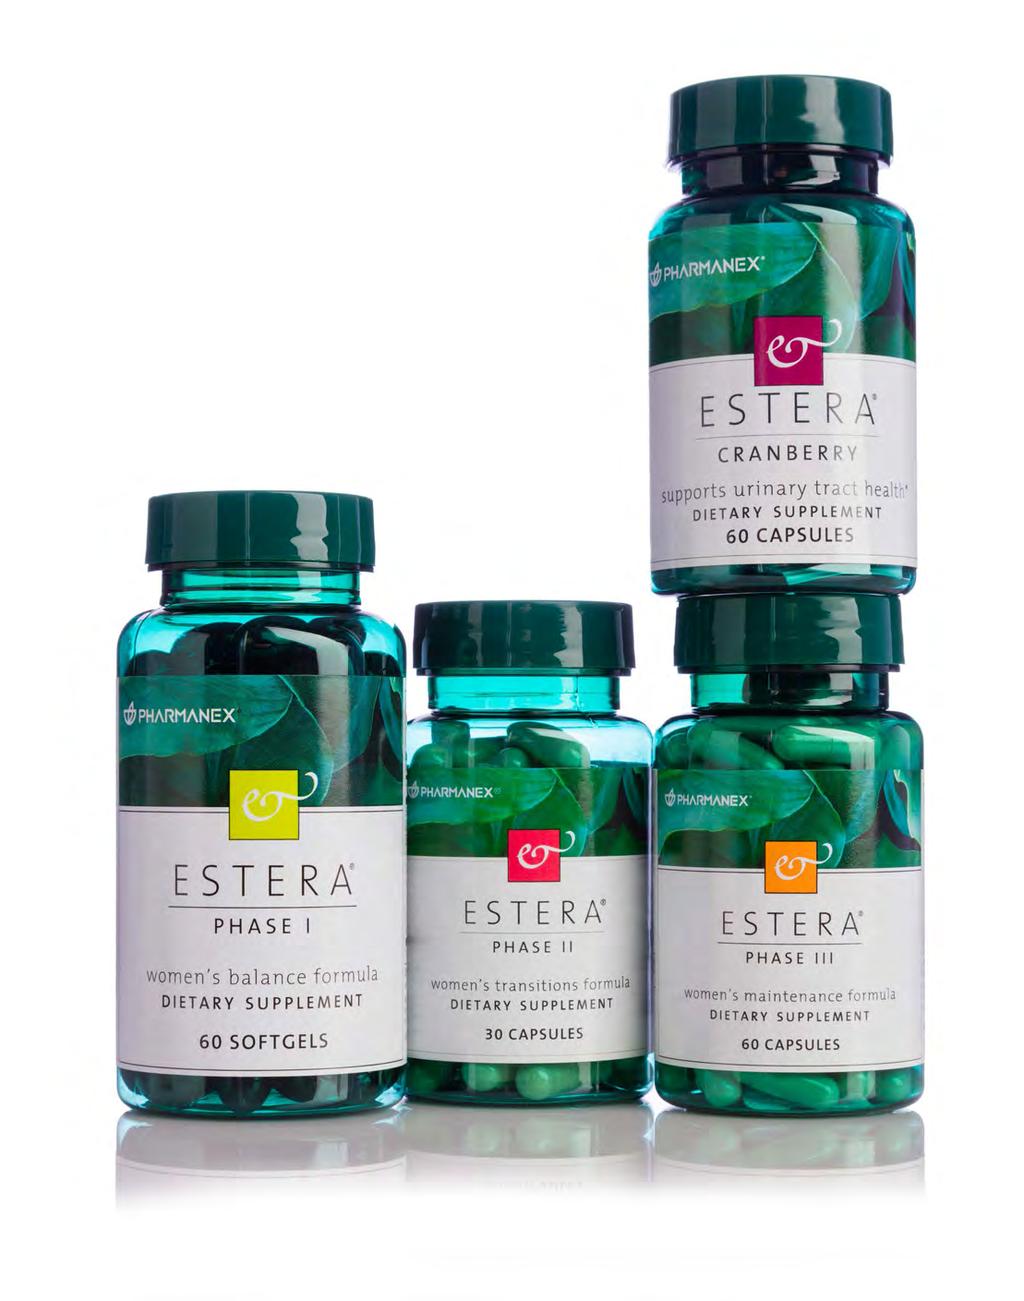 ESTERA PHASE I Estera Phase I Balance Formula is designed for women in their childbearing years to help promote a healthy ratio of estrogen metabolites and provide relief from common PMS symptoms.